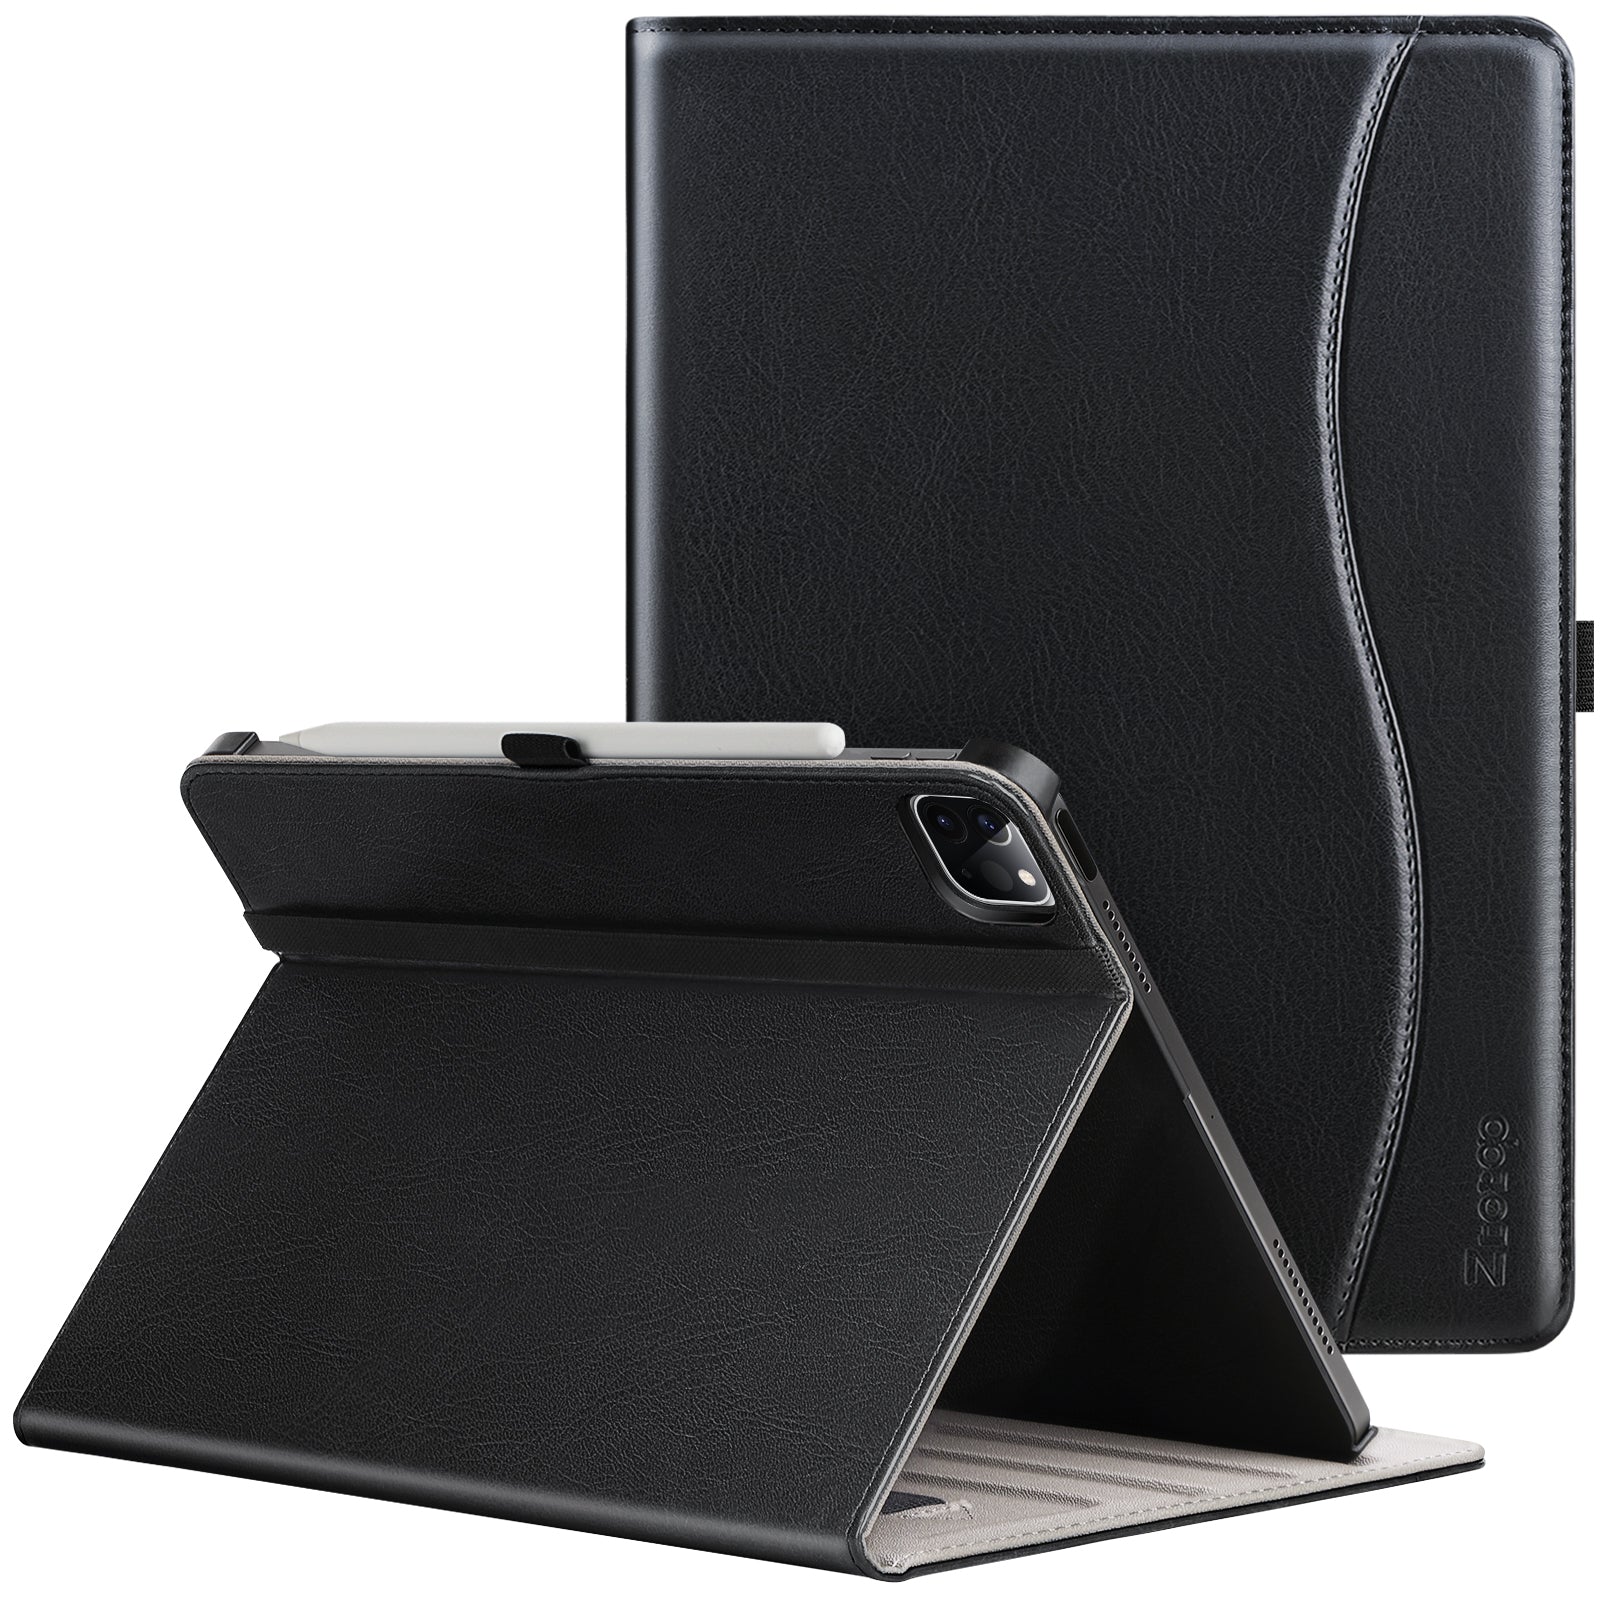 ZtotopCases for iPad Pro 12.9 Case 6th/5th/4th/3rd Generation 2022/2021/2020/2018, Premium PU Leather Folio Cover - Auto Wake/Sleep - Pencil Charging for 12.9 Inch 6/5/4/3 Gen, Brown